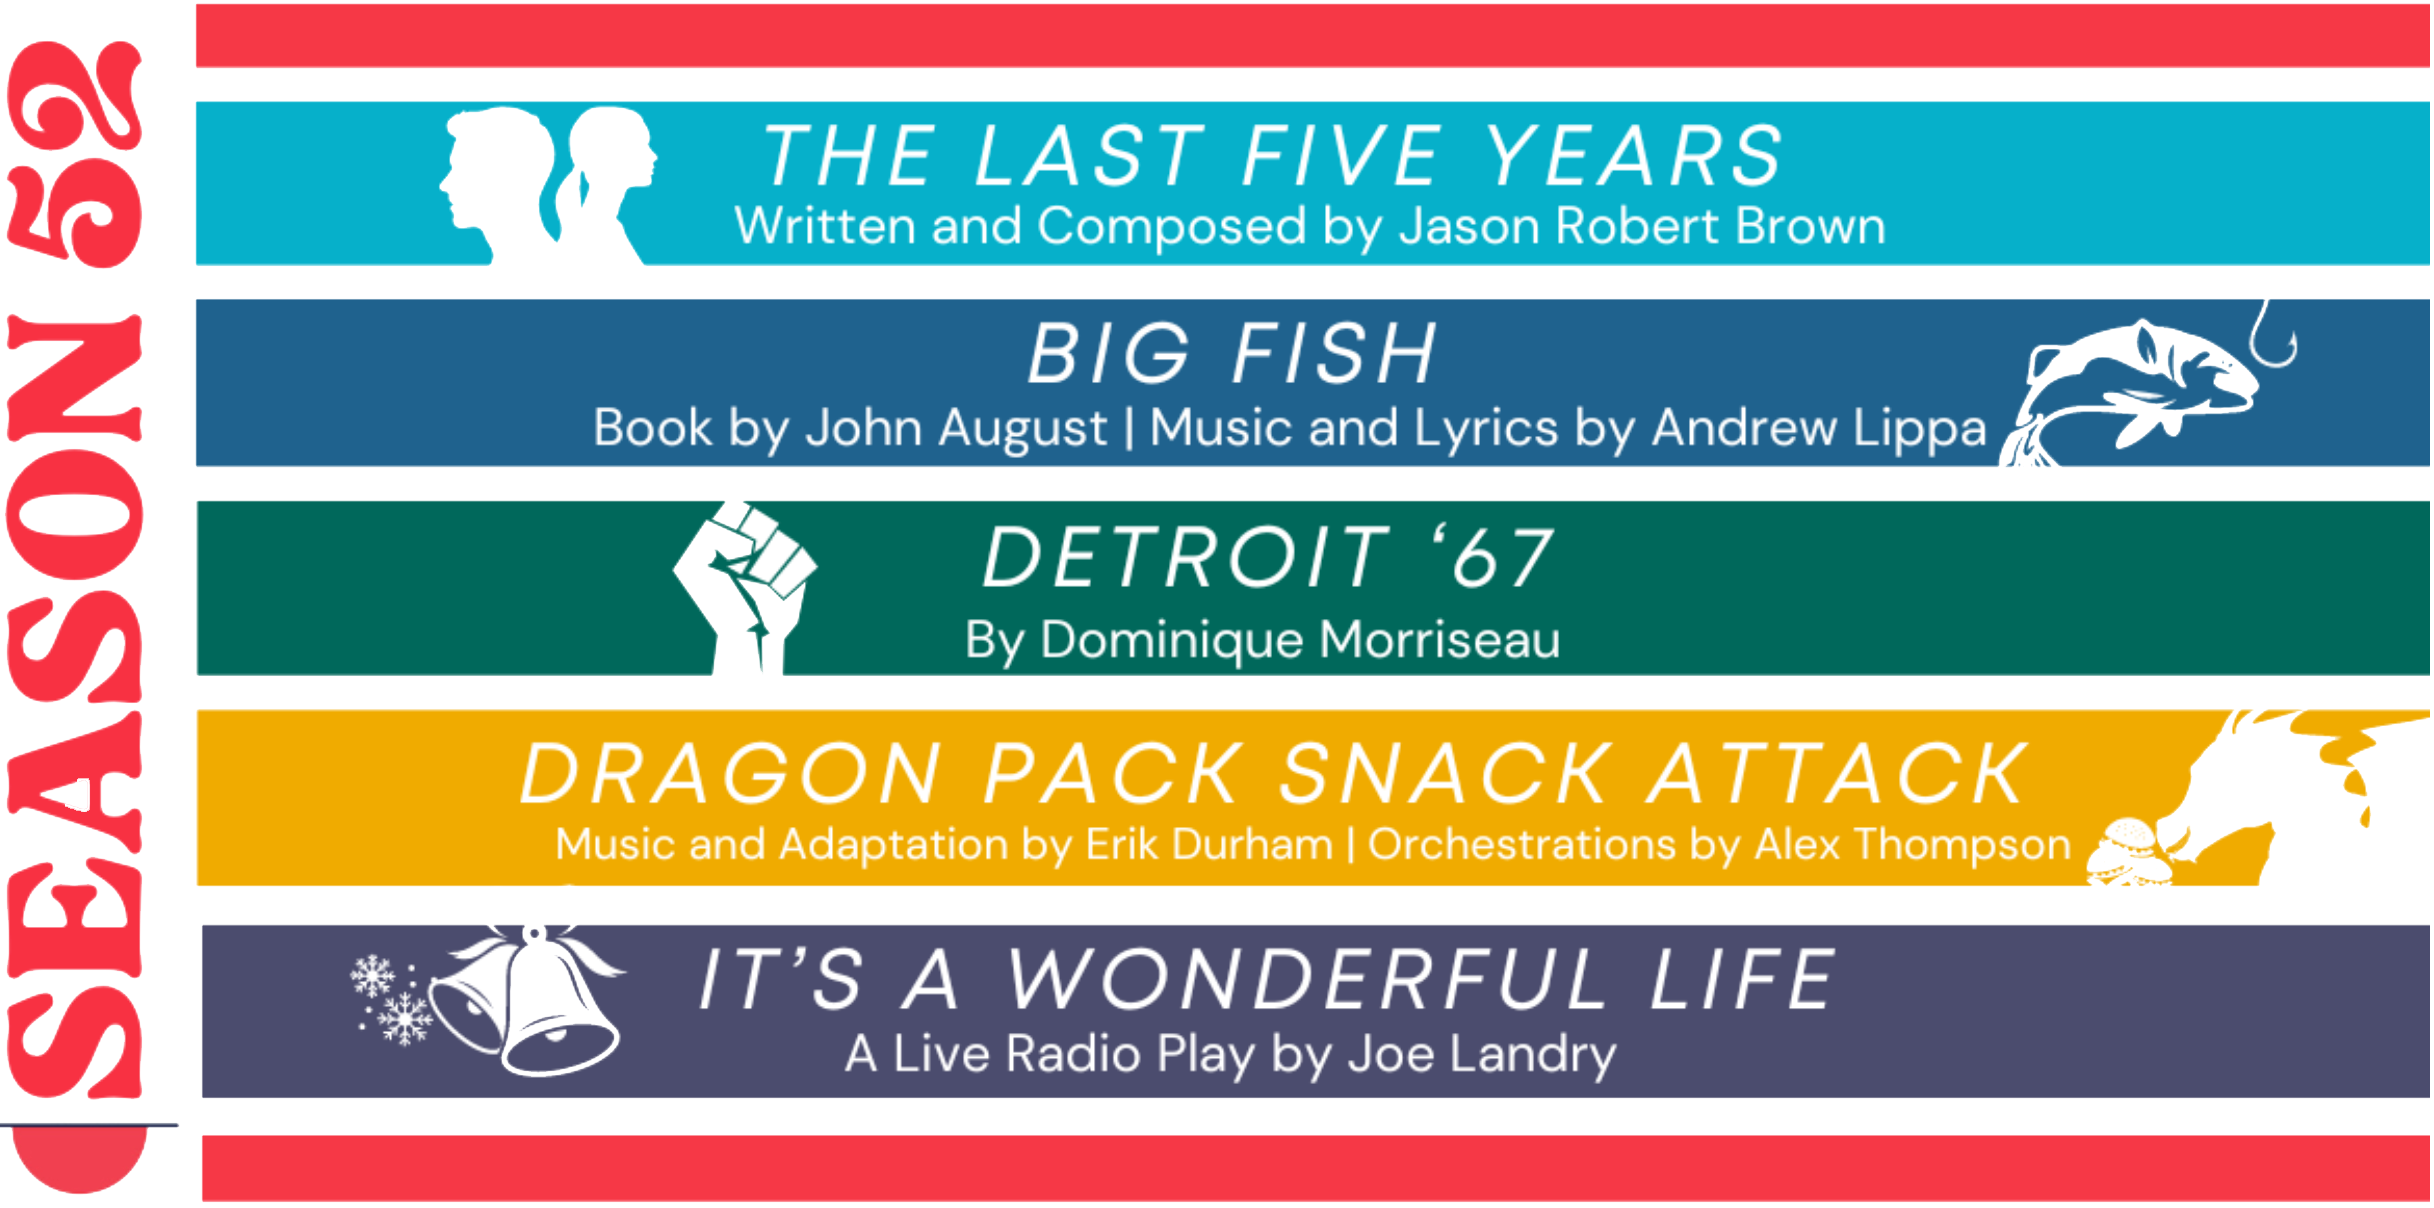 Season 52: “The Last Five Years,” written and composed by Jason Robert Brown; “Big Fish,” book by John August, music and lyrics by Andrew Lippa; “Detroit ’67,” by Dominique Morriseau; “Dragon Pack Snack Attack,” music and adaptation by Erik Durham, orchestrations by Alex Thompson; “It’s A Wonderful Life: A Live Radio Play,” by Joe Landry